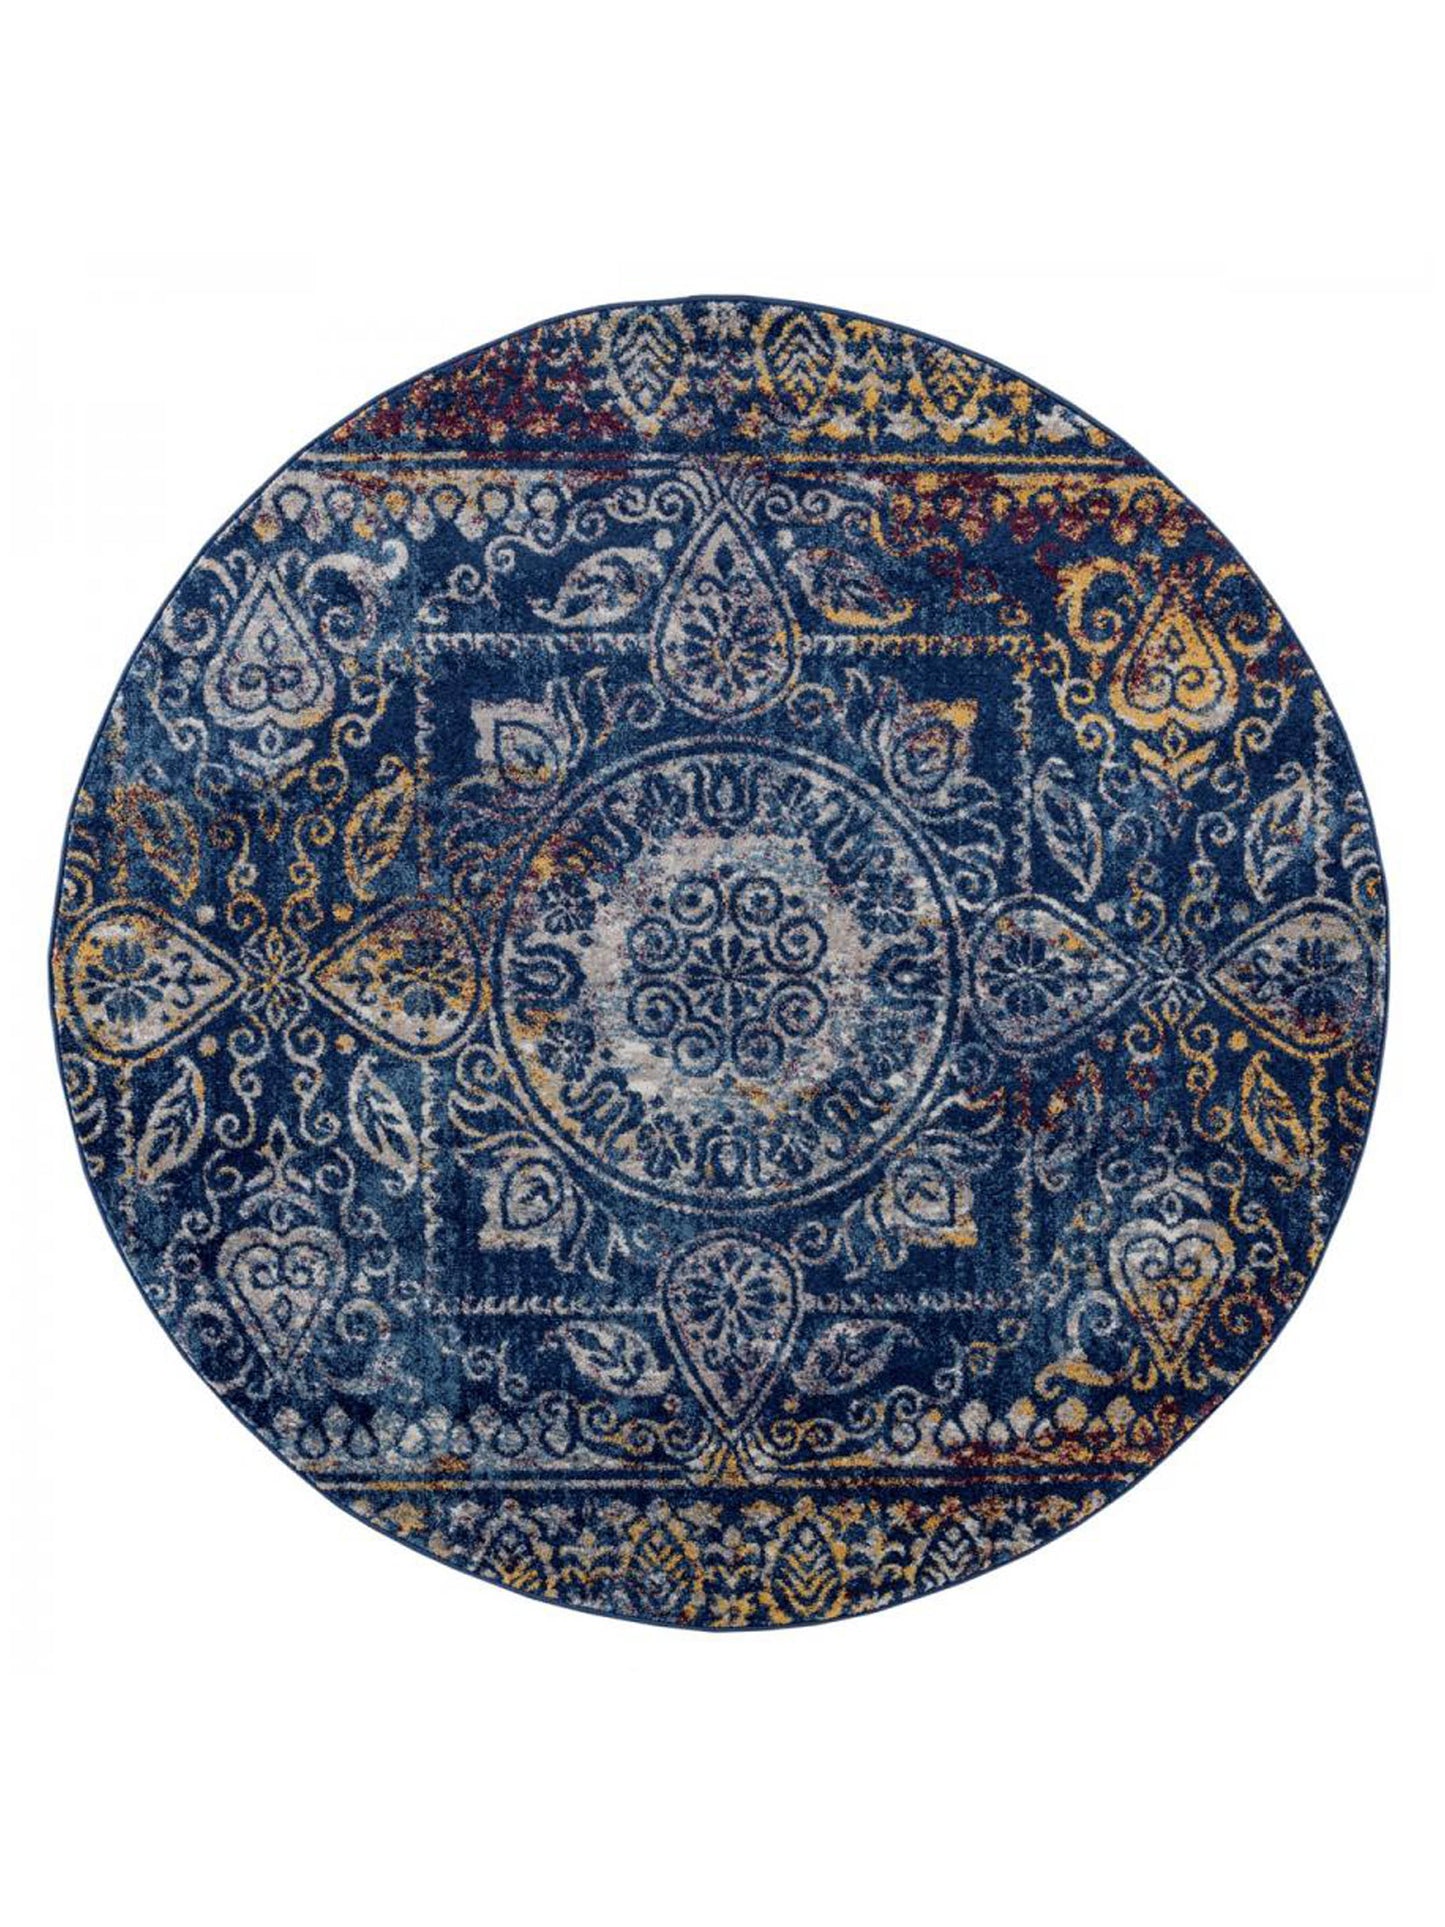 Limited Grace GE-359 TEAL BLUE  Transitional Machinemade Rug